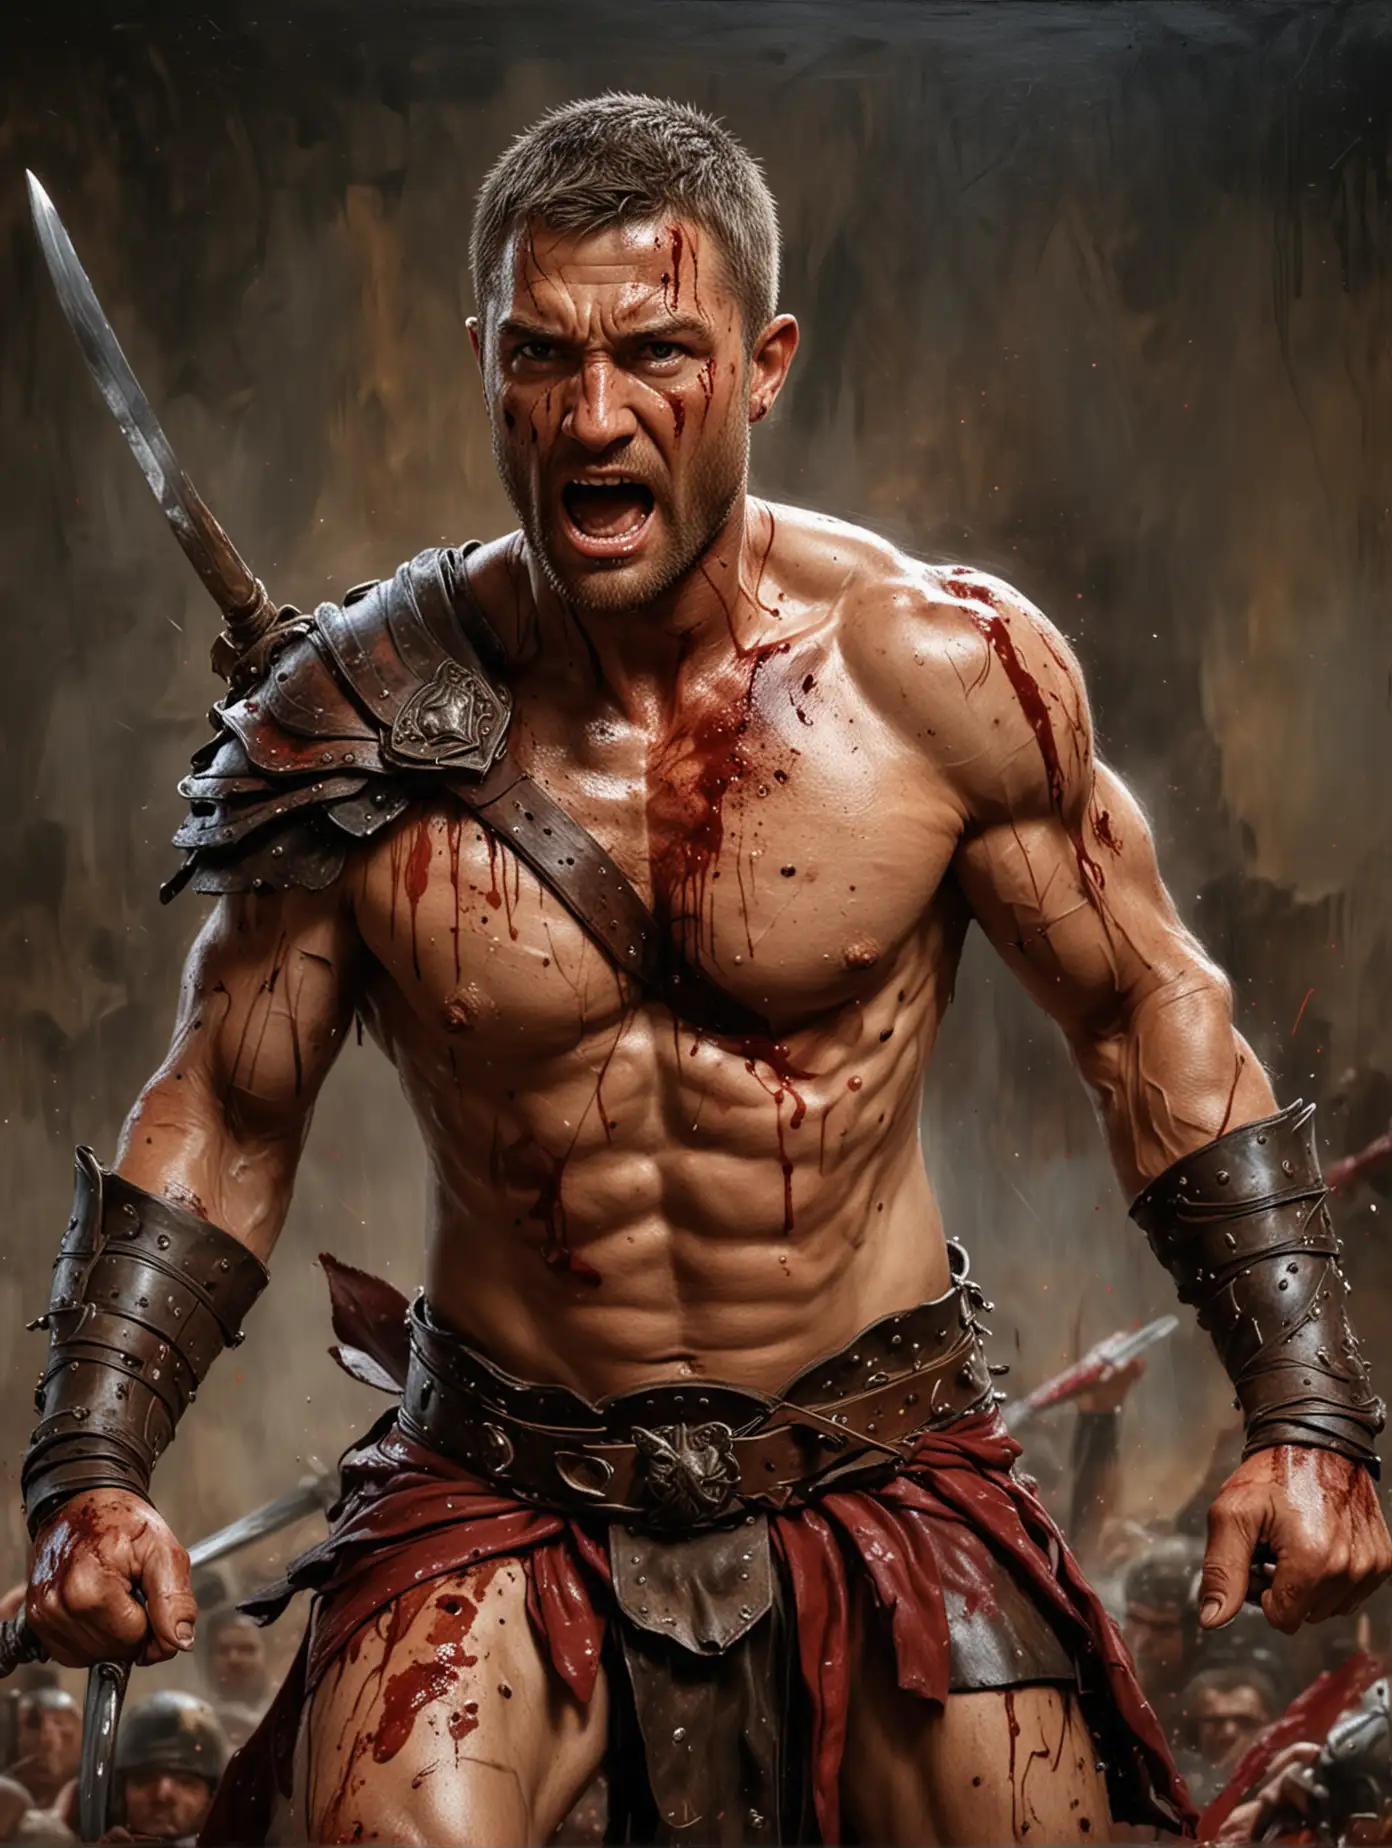 A realistic 3D oil painting of Spartacus in battle in full combat position with blood on his body